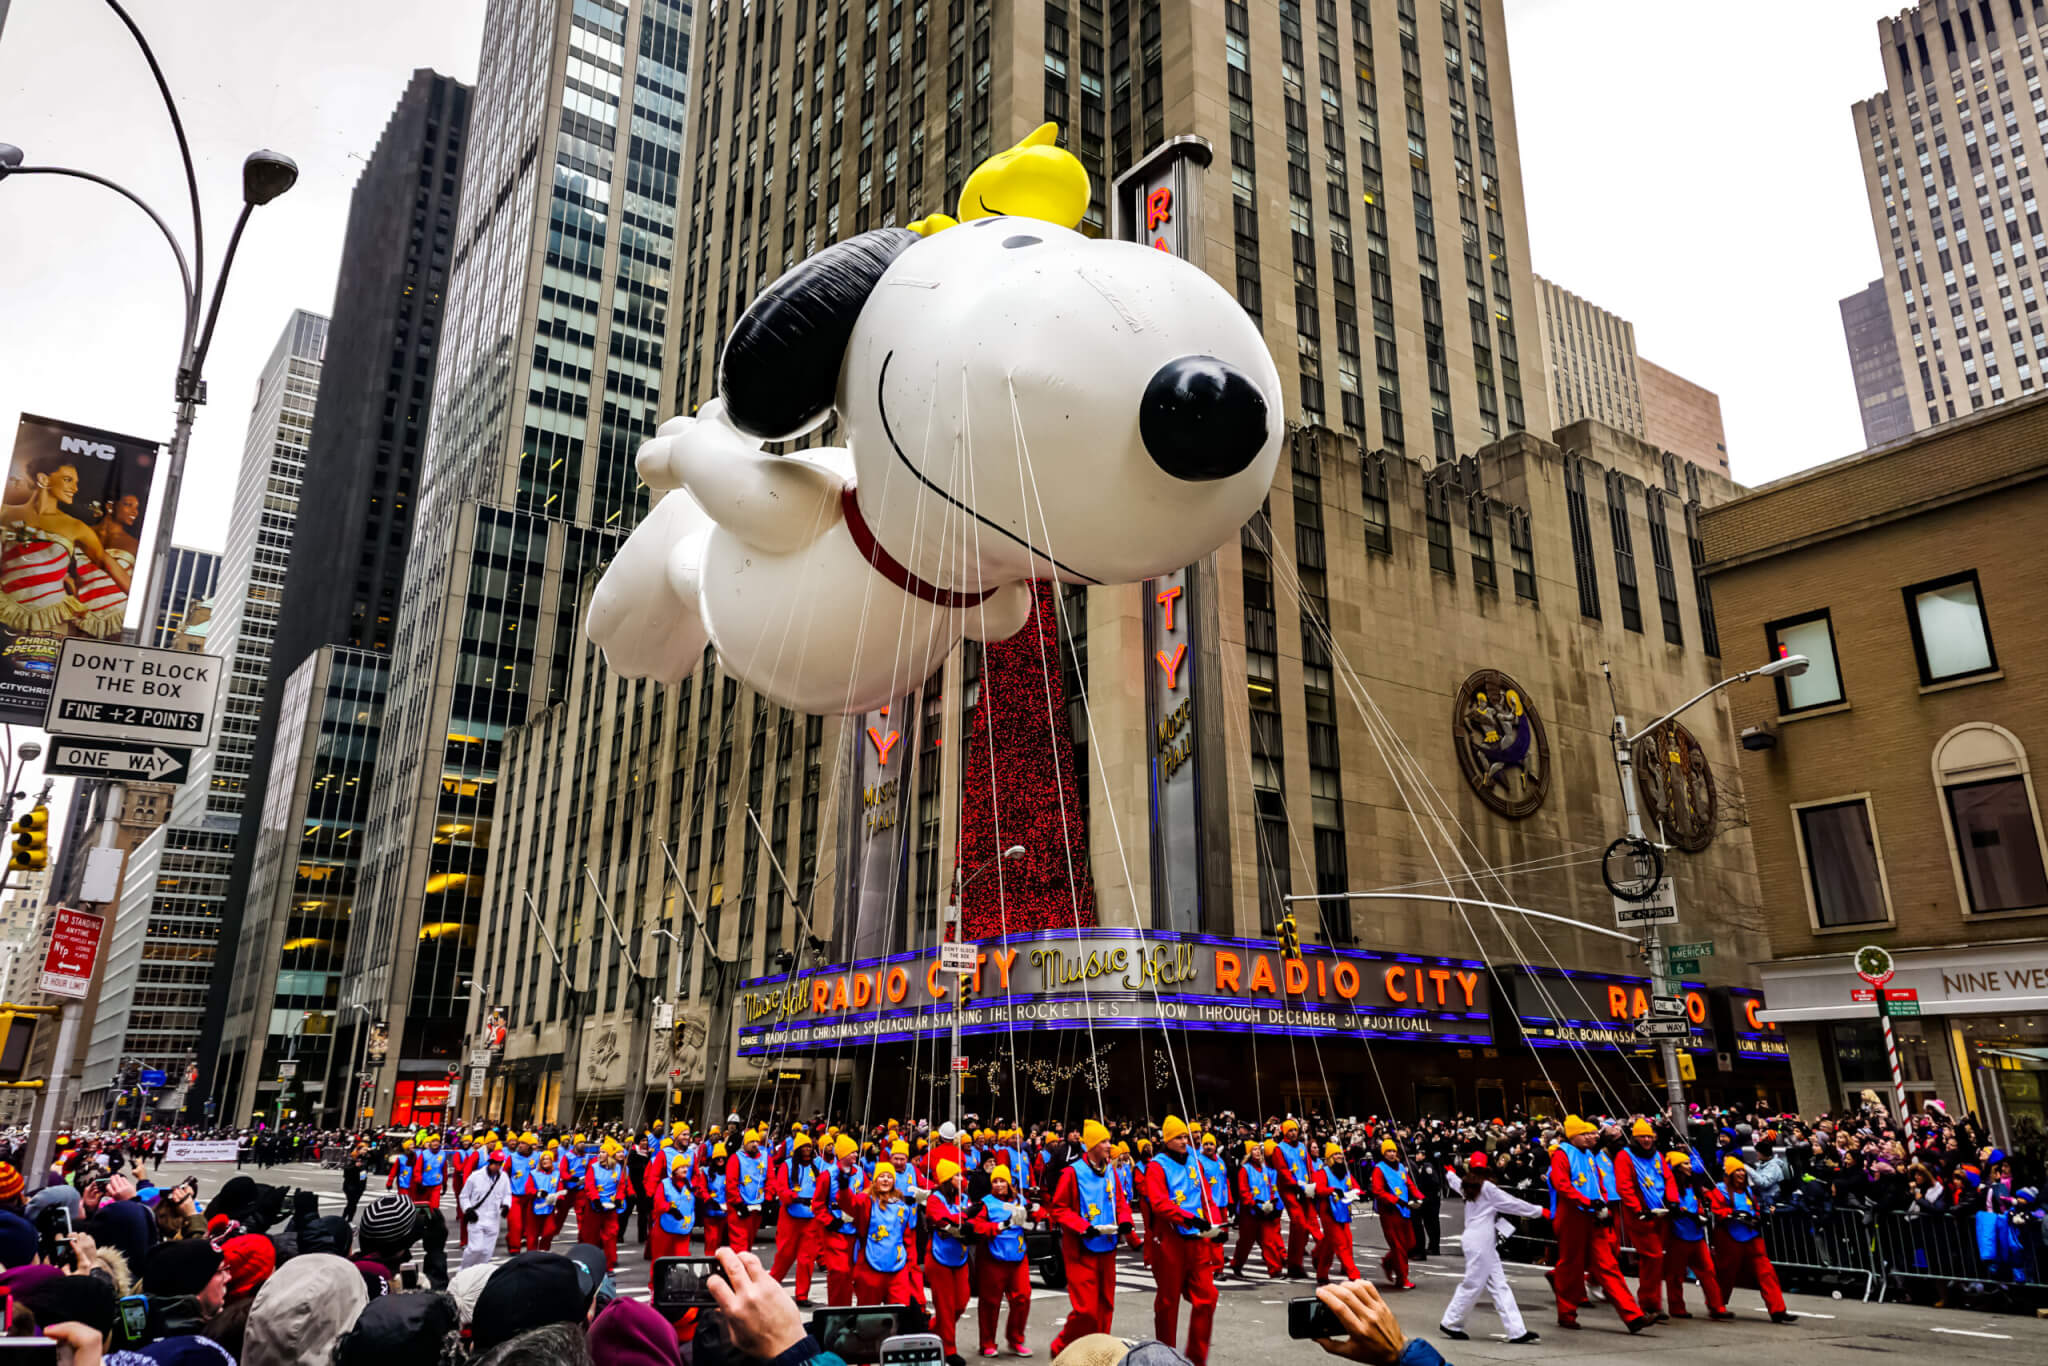 The Snoopy float at Macy's Thanksgiving Day Parade in New York City